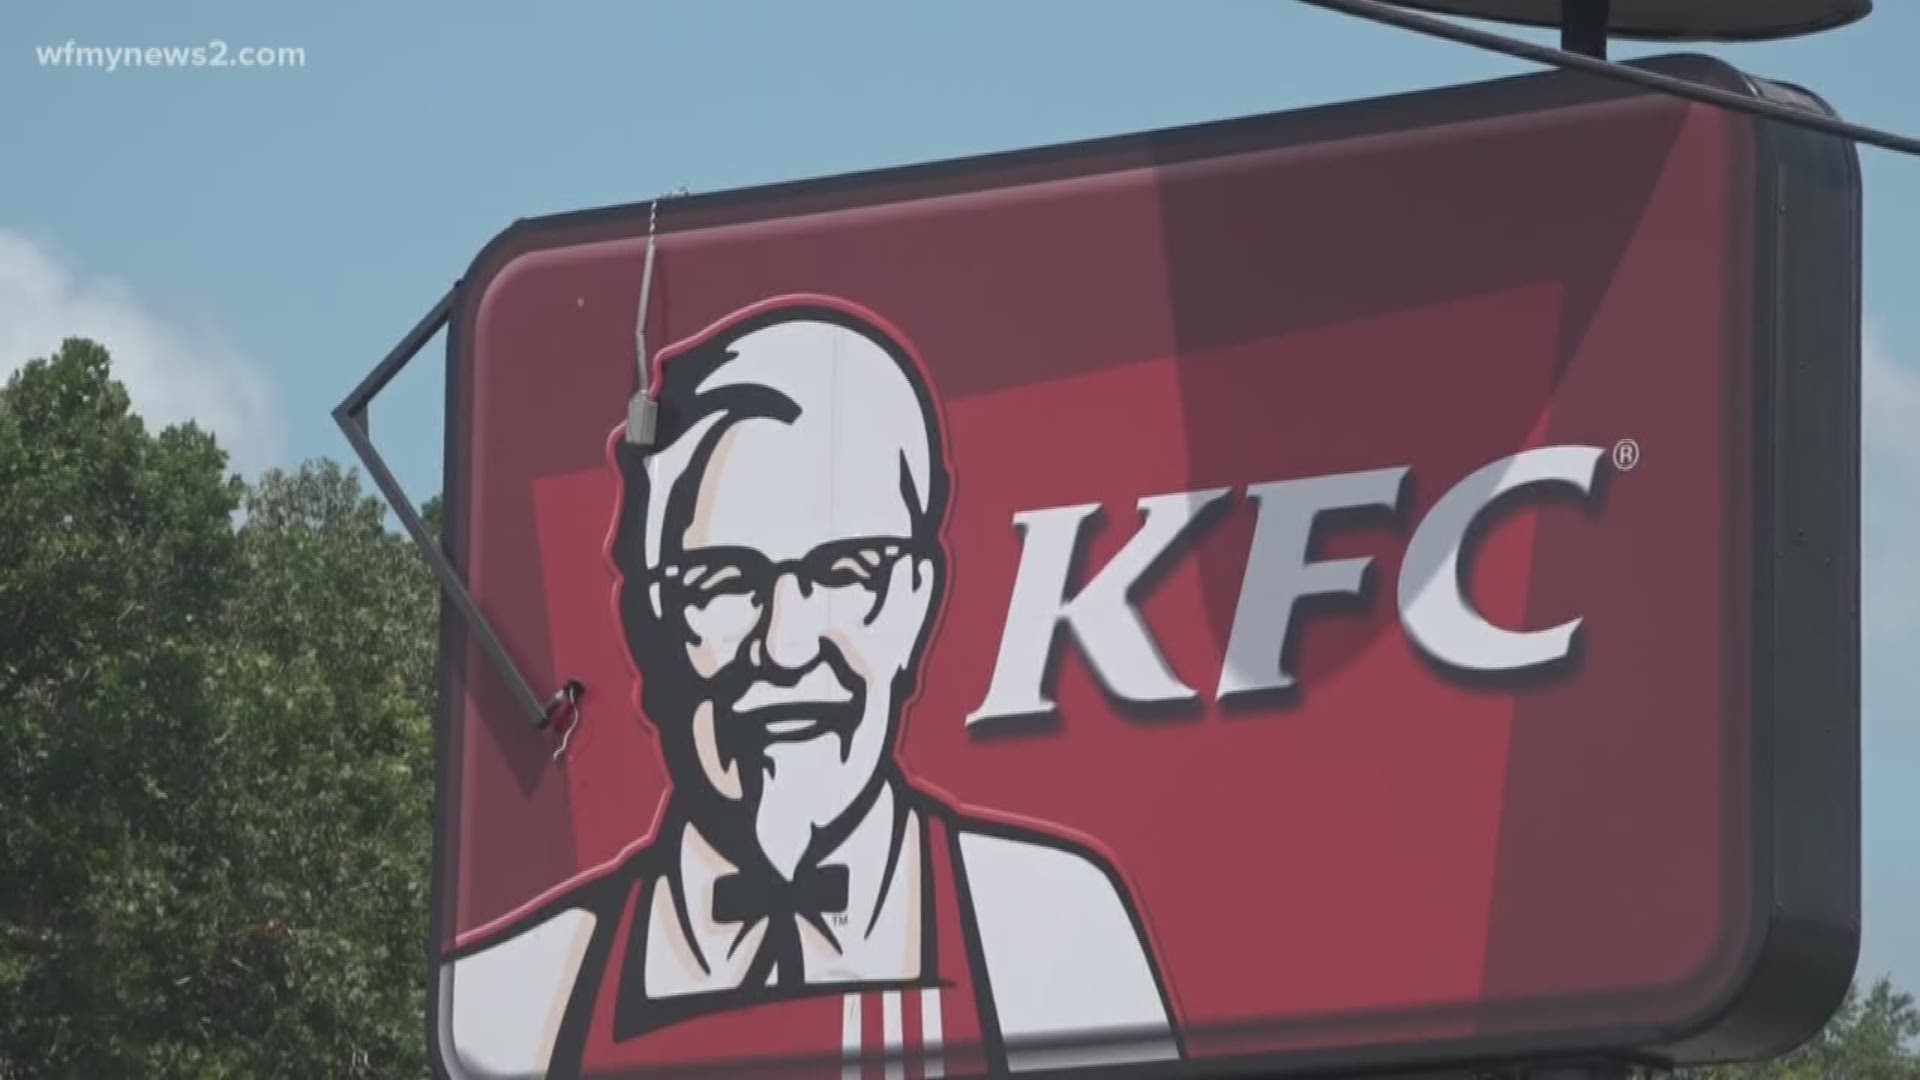 KFC says the 20 impacted employees will be able to work at six different locations in the area.